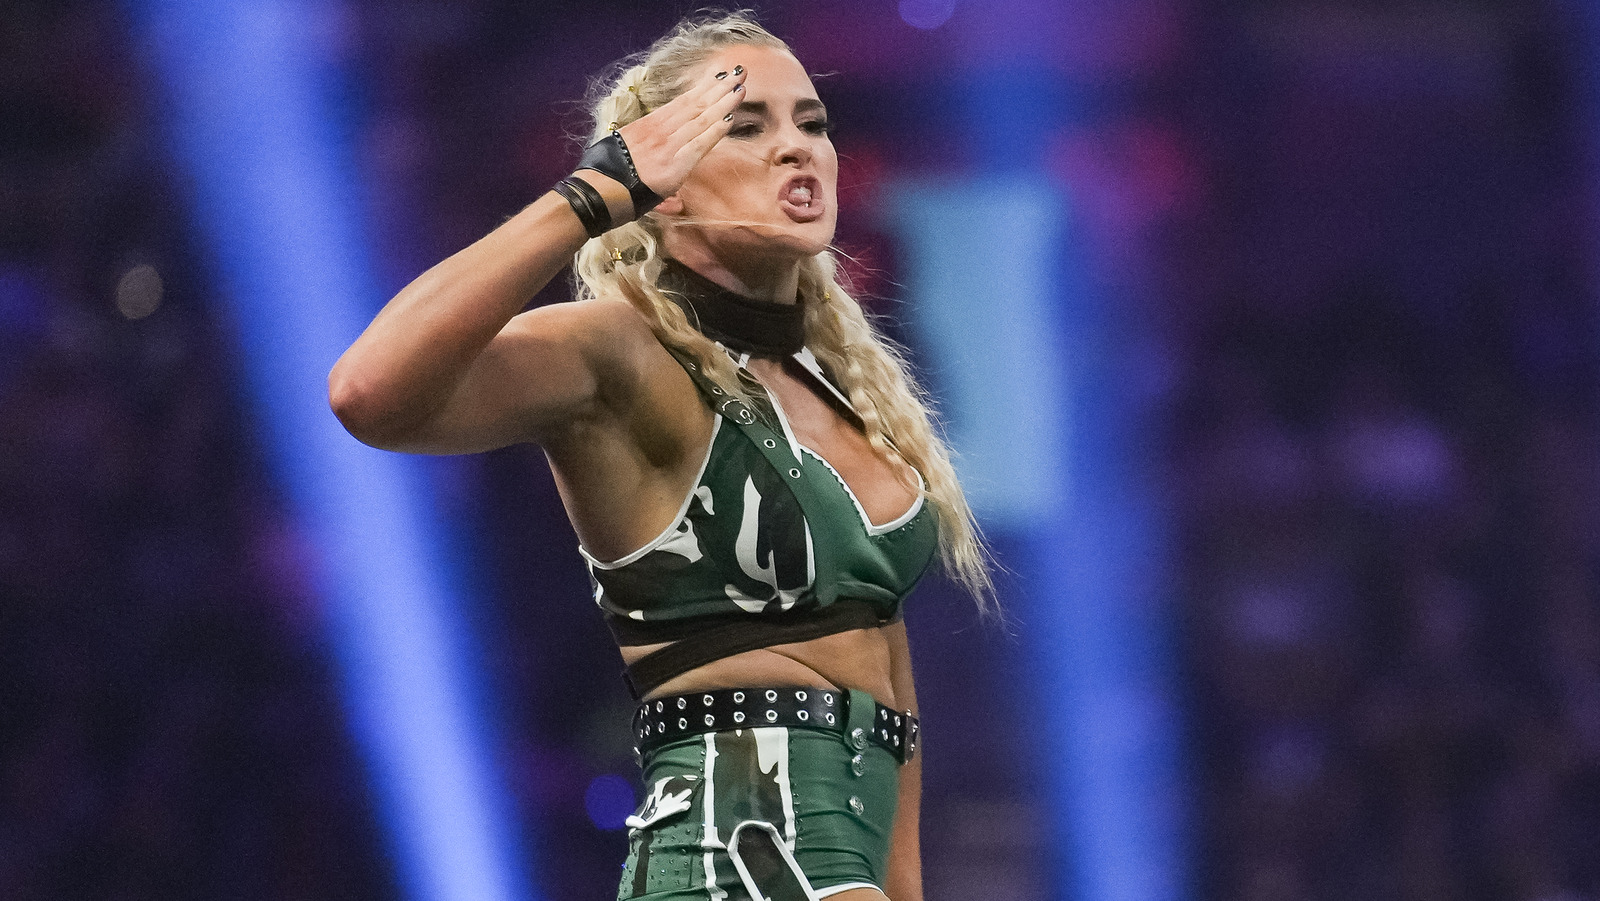 Former Wwe Star Lacey Evans Explains Why She Asked For Release Wrestling Inc 